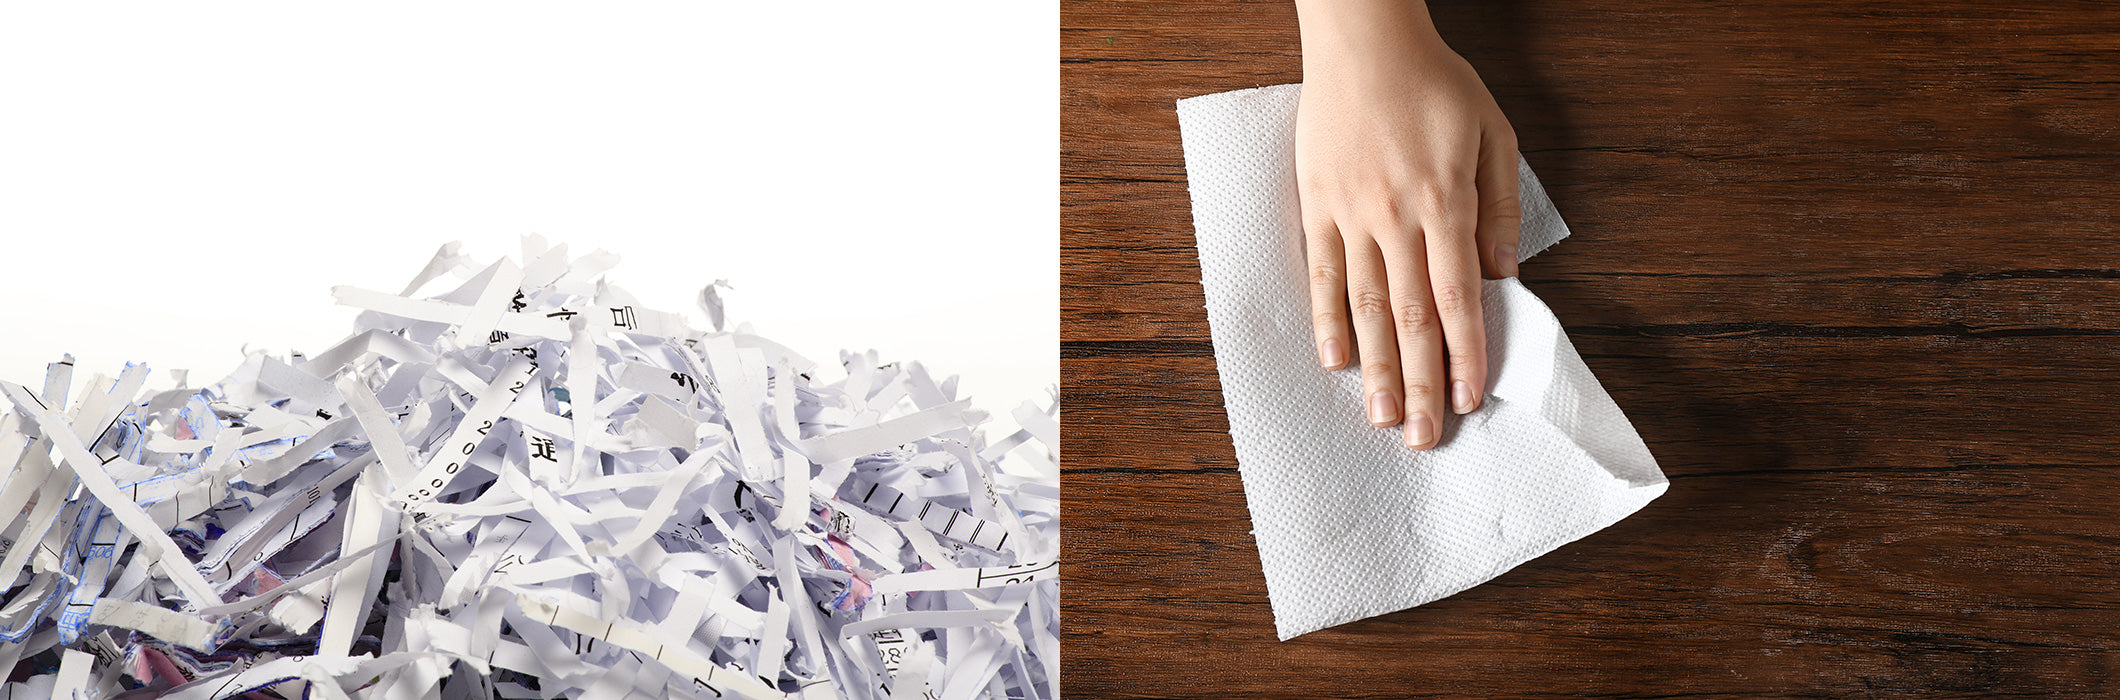 shredded paper and hand using simplehuman paper towel